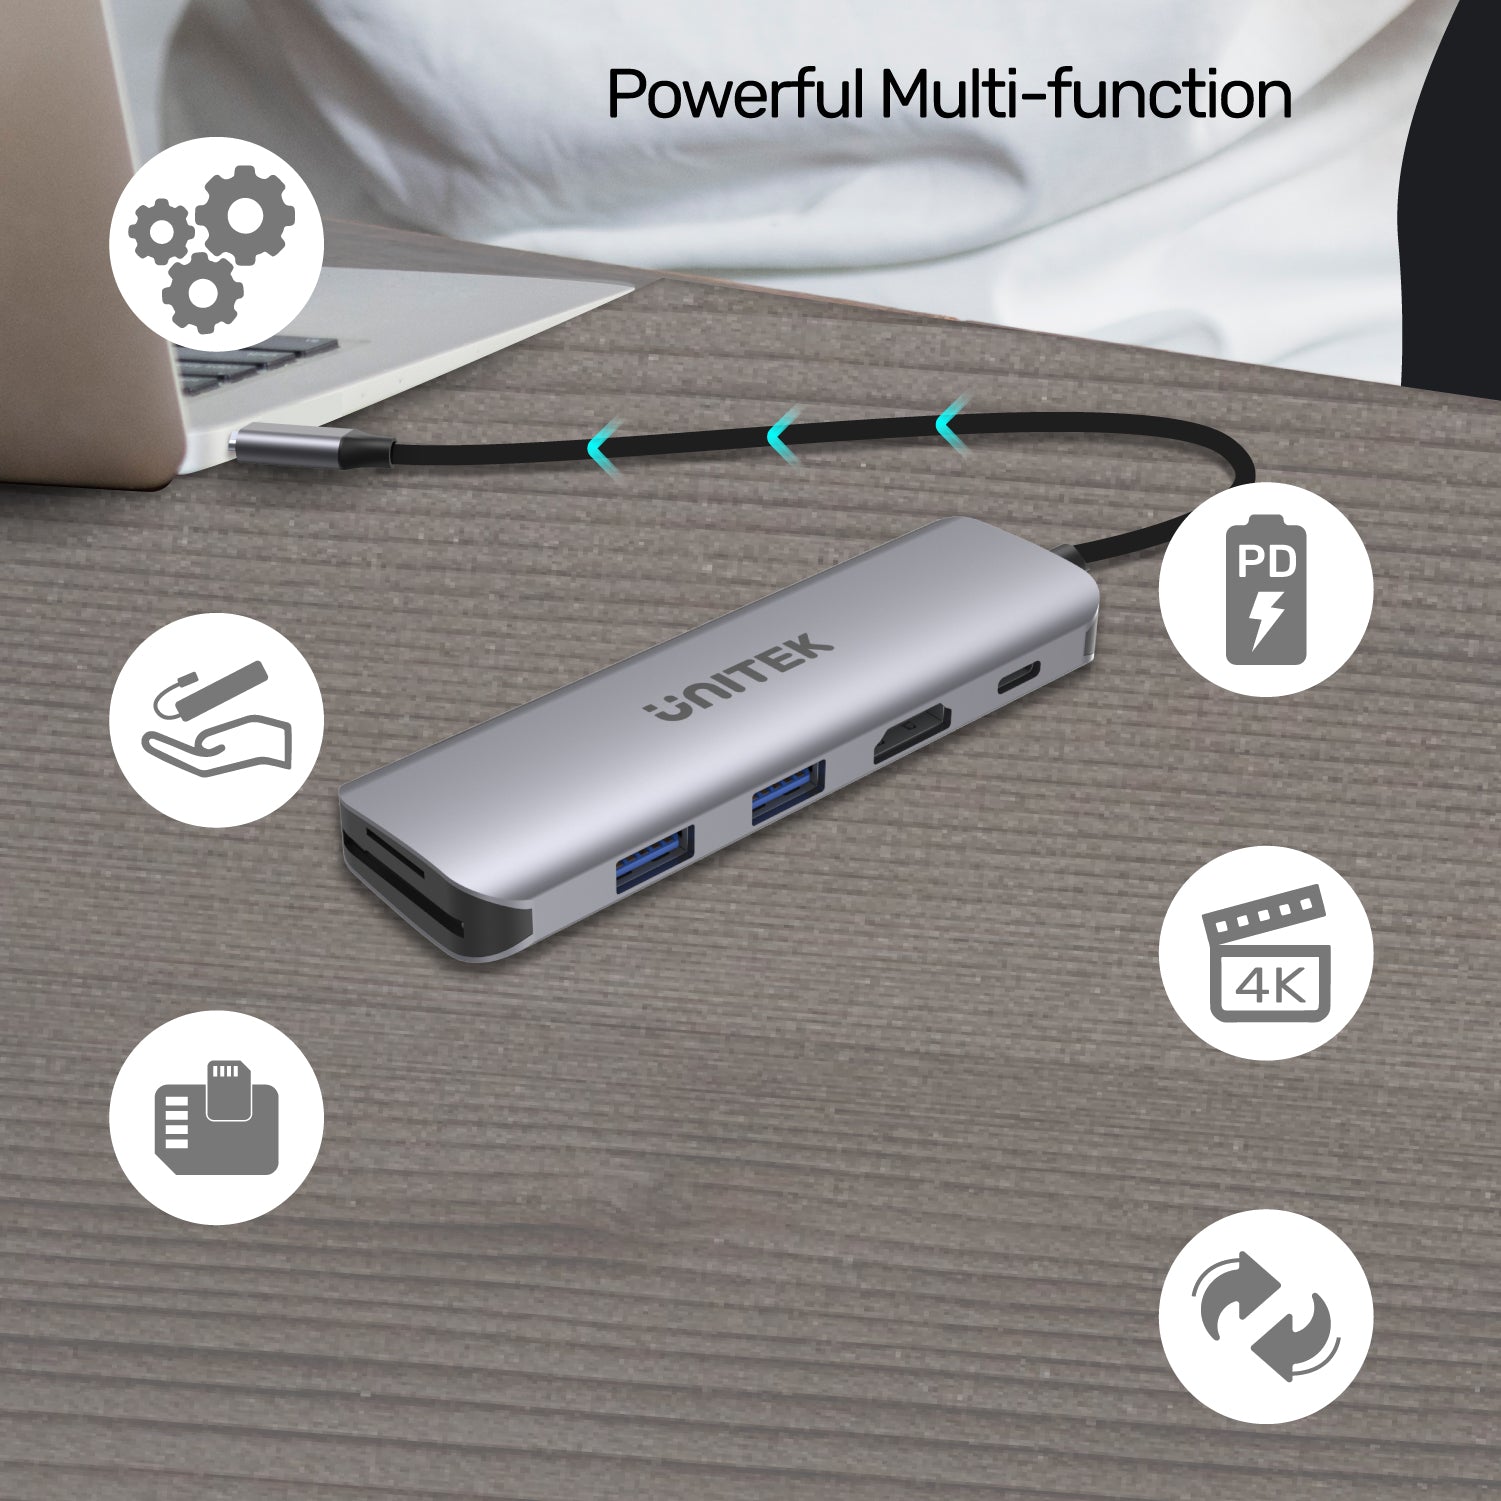 uHUB P5+ 6-in-1 USB-C Hub with HDMI, 100W Power Delivery and Dual Card Reader